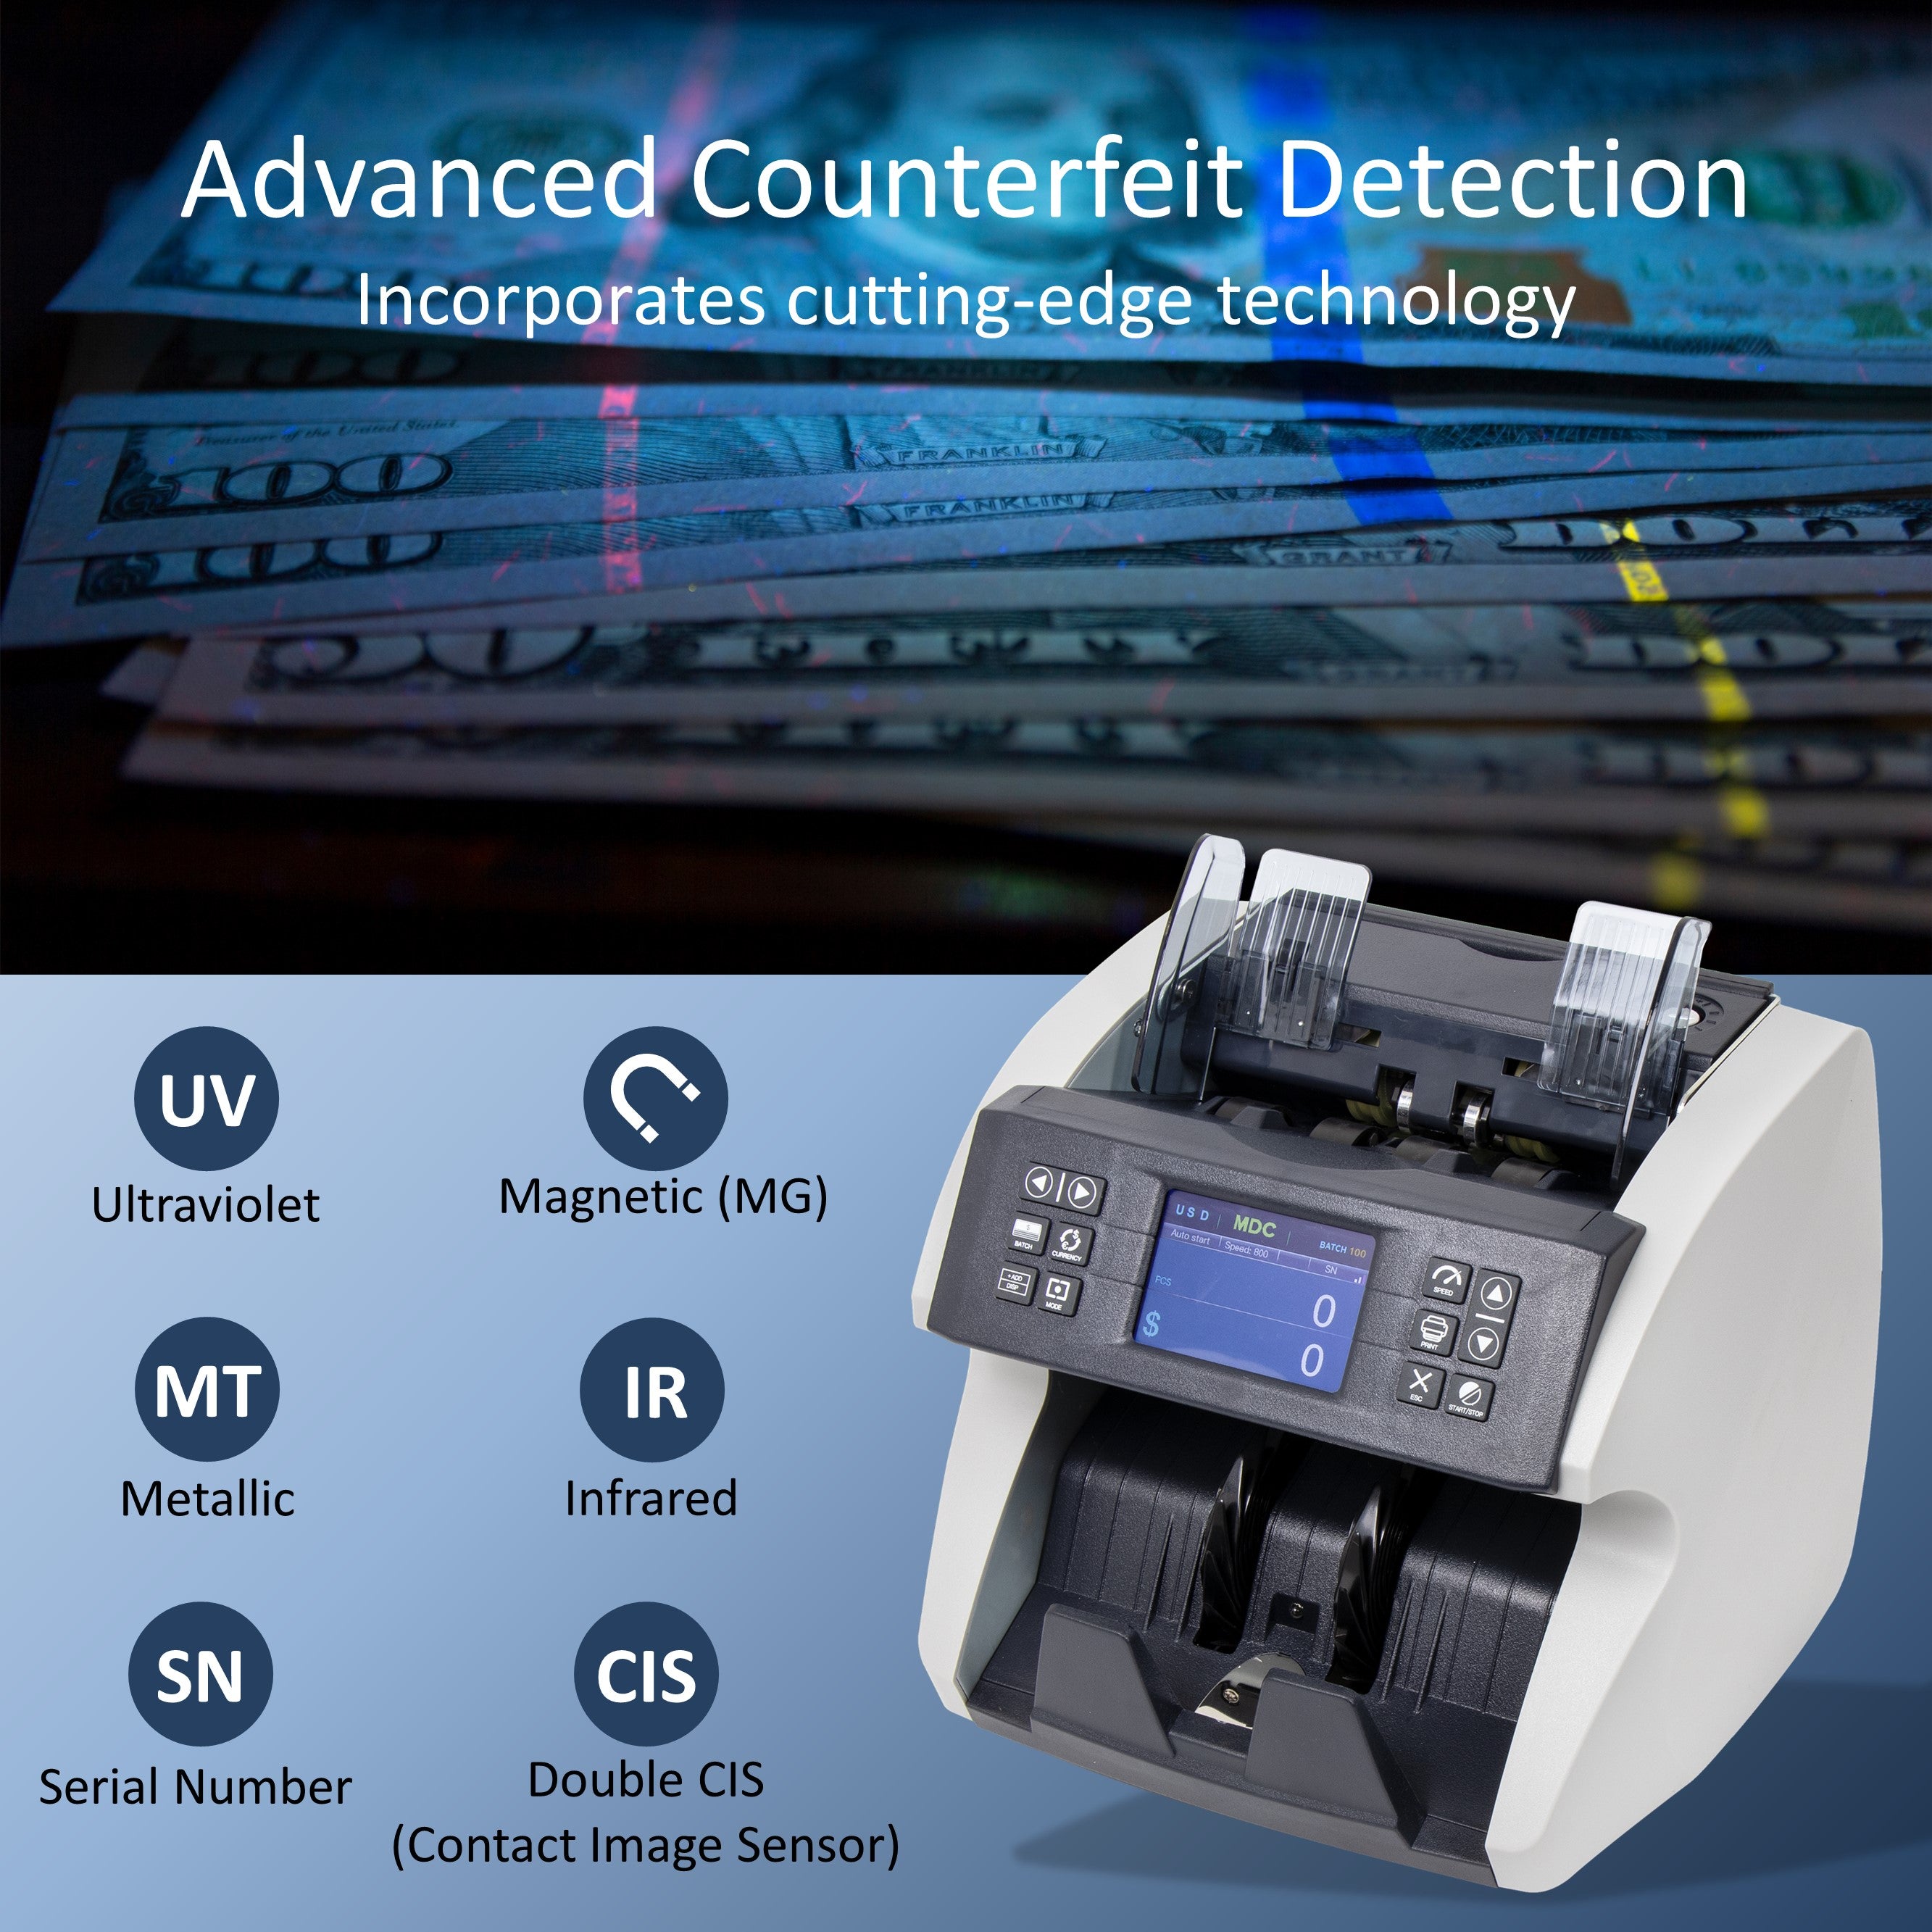 Awoco Bank Grade Mixed Denomination Bill Money Counter with Full Counterfeit Detection - 6 Currency (USD, EUR, GBP, MXN, CAD, CNY) with External Display